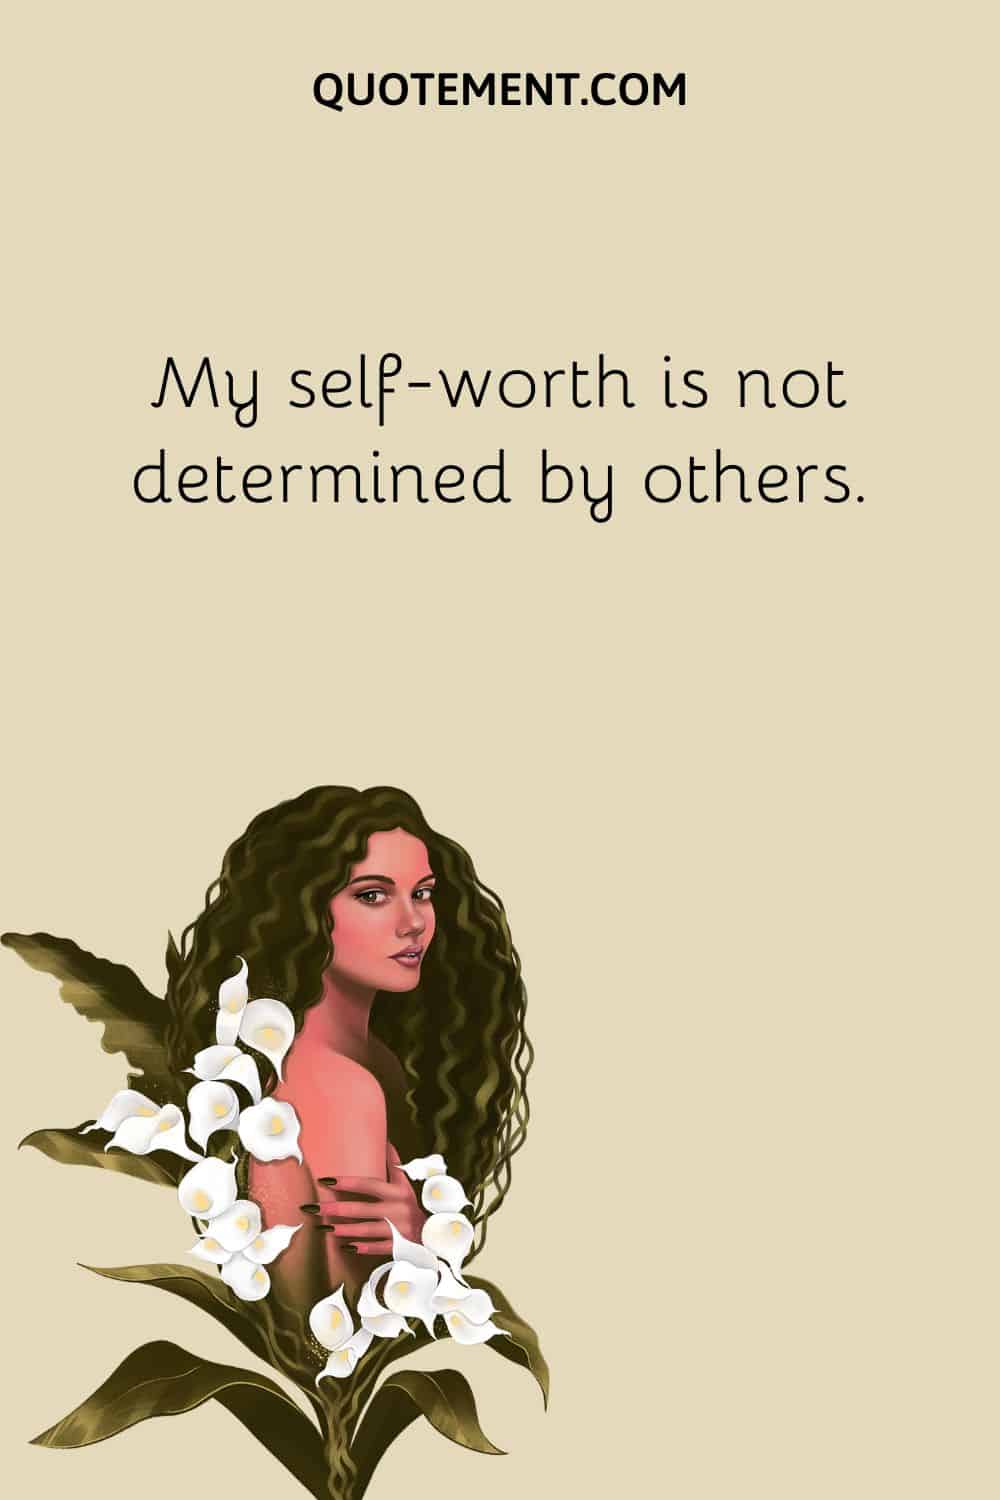 My self-worth is not determined by others